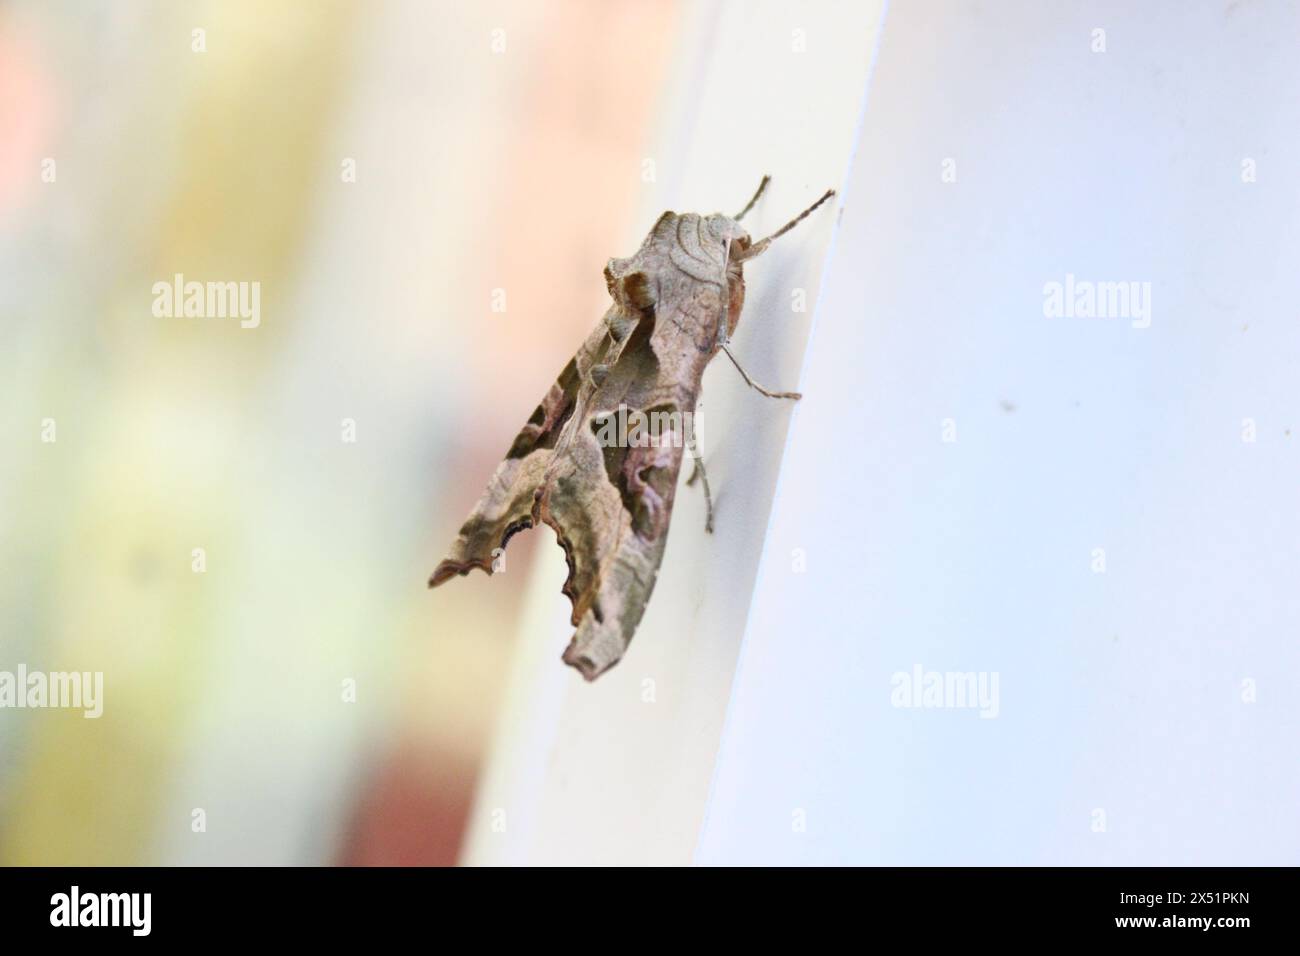 An Angle Shades (Phlogophora Meticulosa) Moth rests on a plastic doorframe Stock Photo